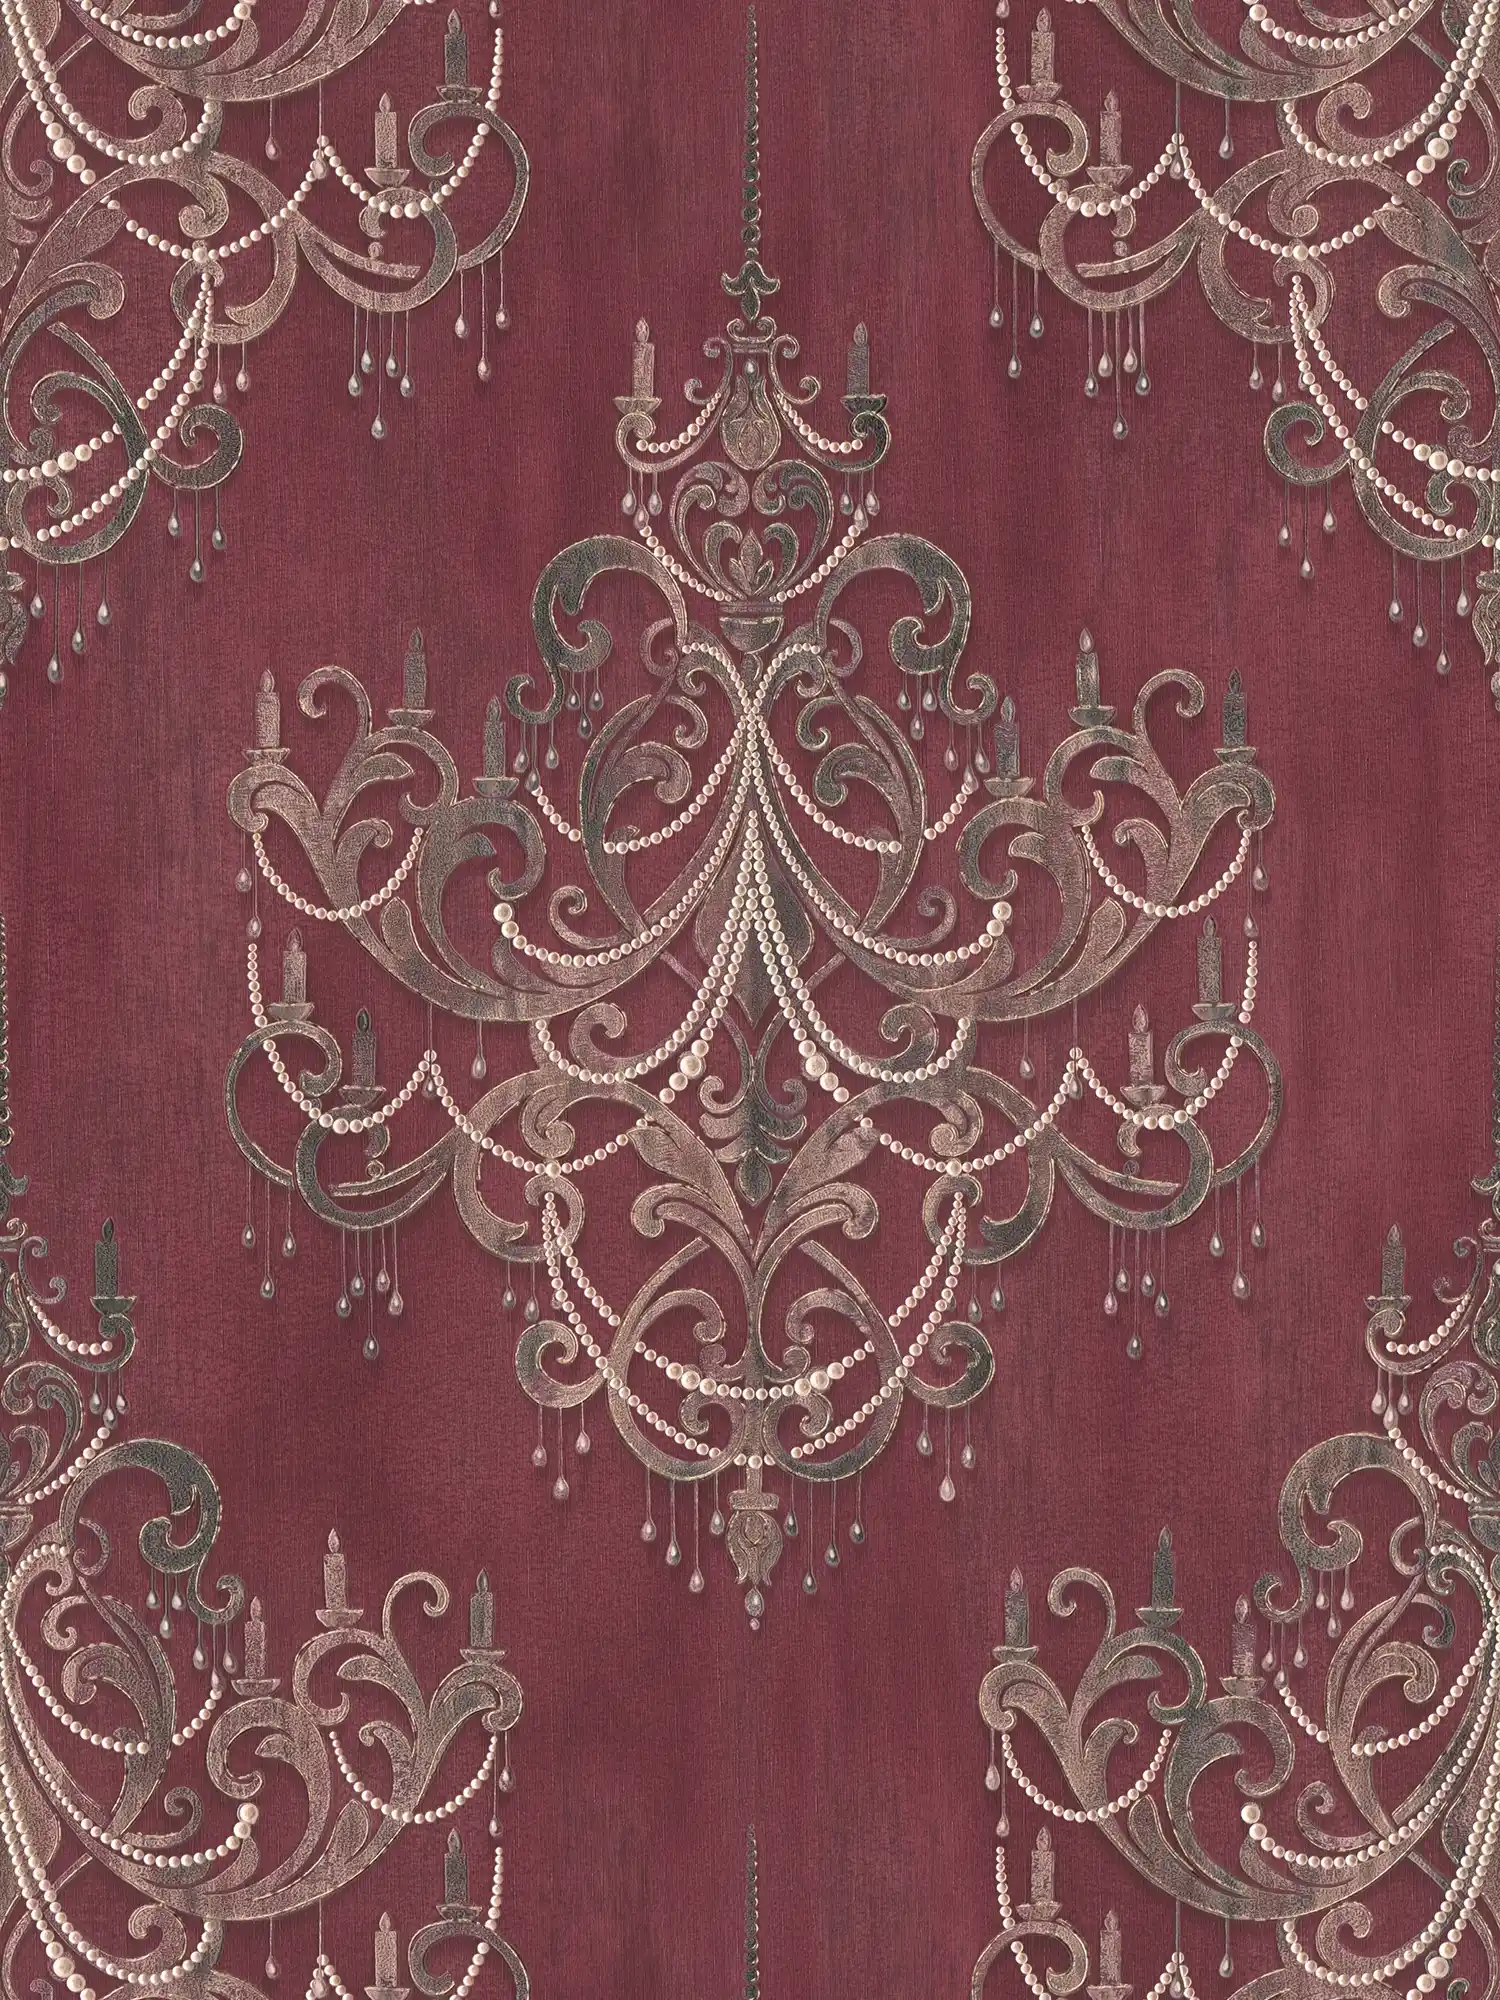 Red ornament wallpaper with pearl pattern & metallic effect
